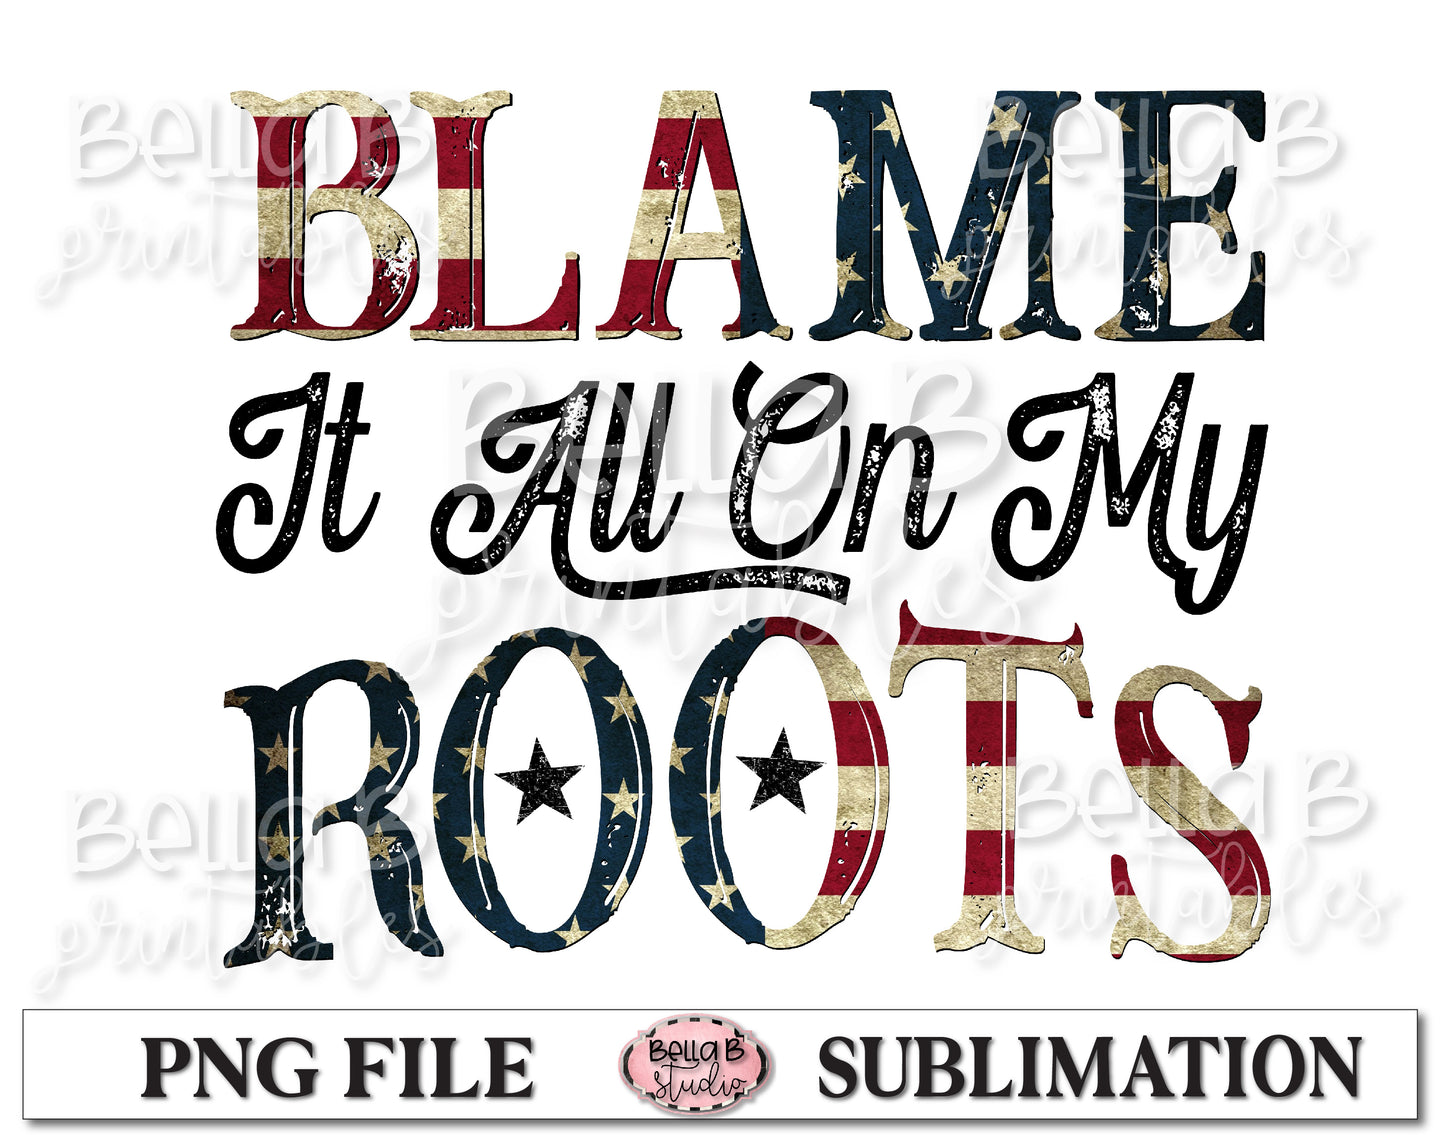 Blame It All On My Roots Sublimation Design